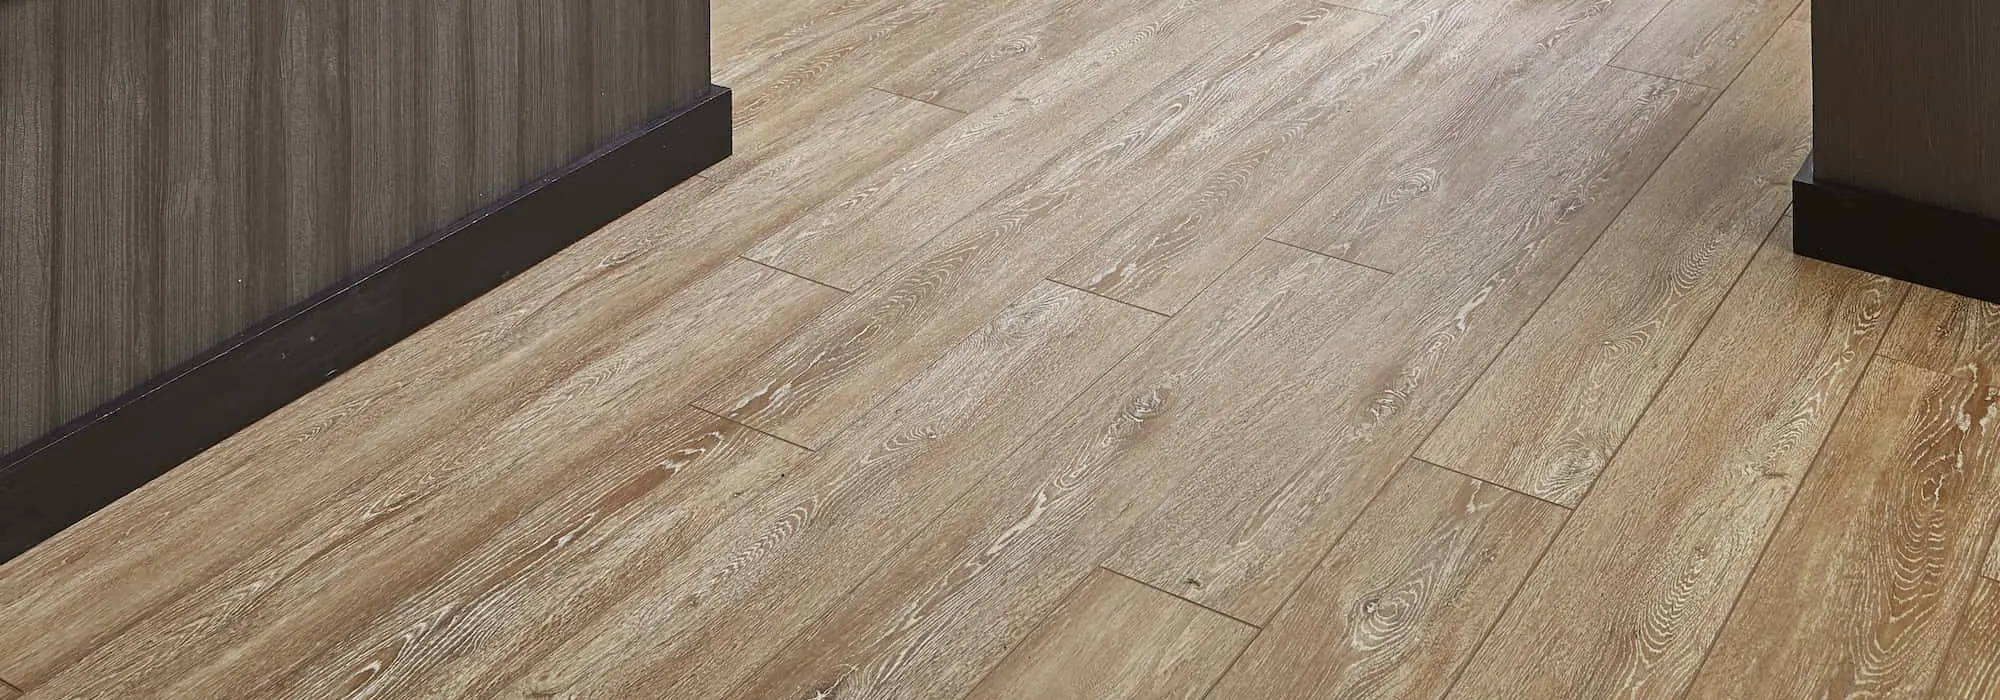 Waterproof flooring is great for family homes